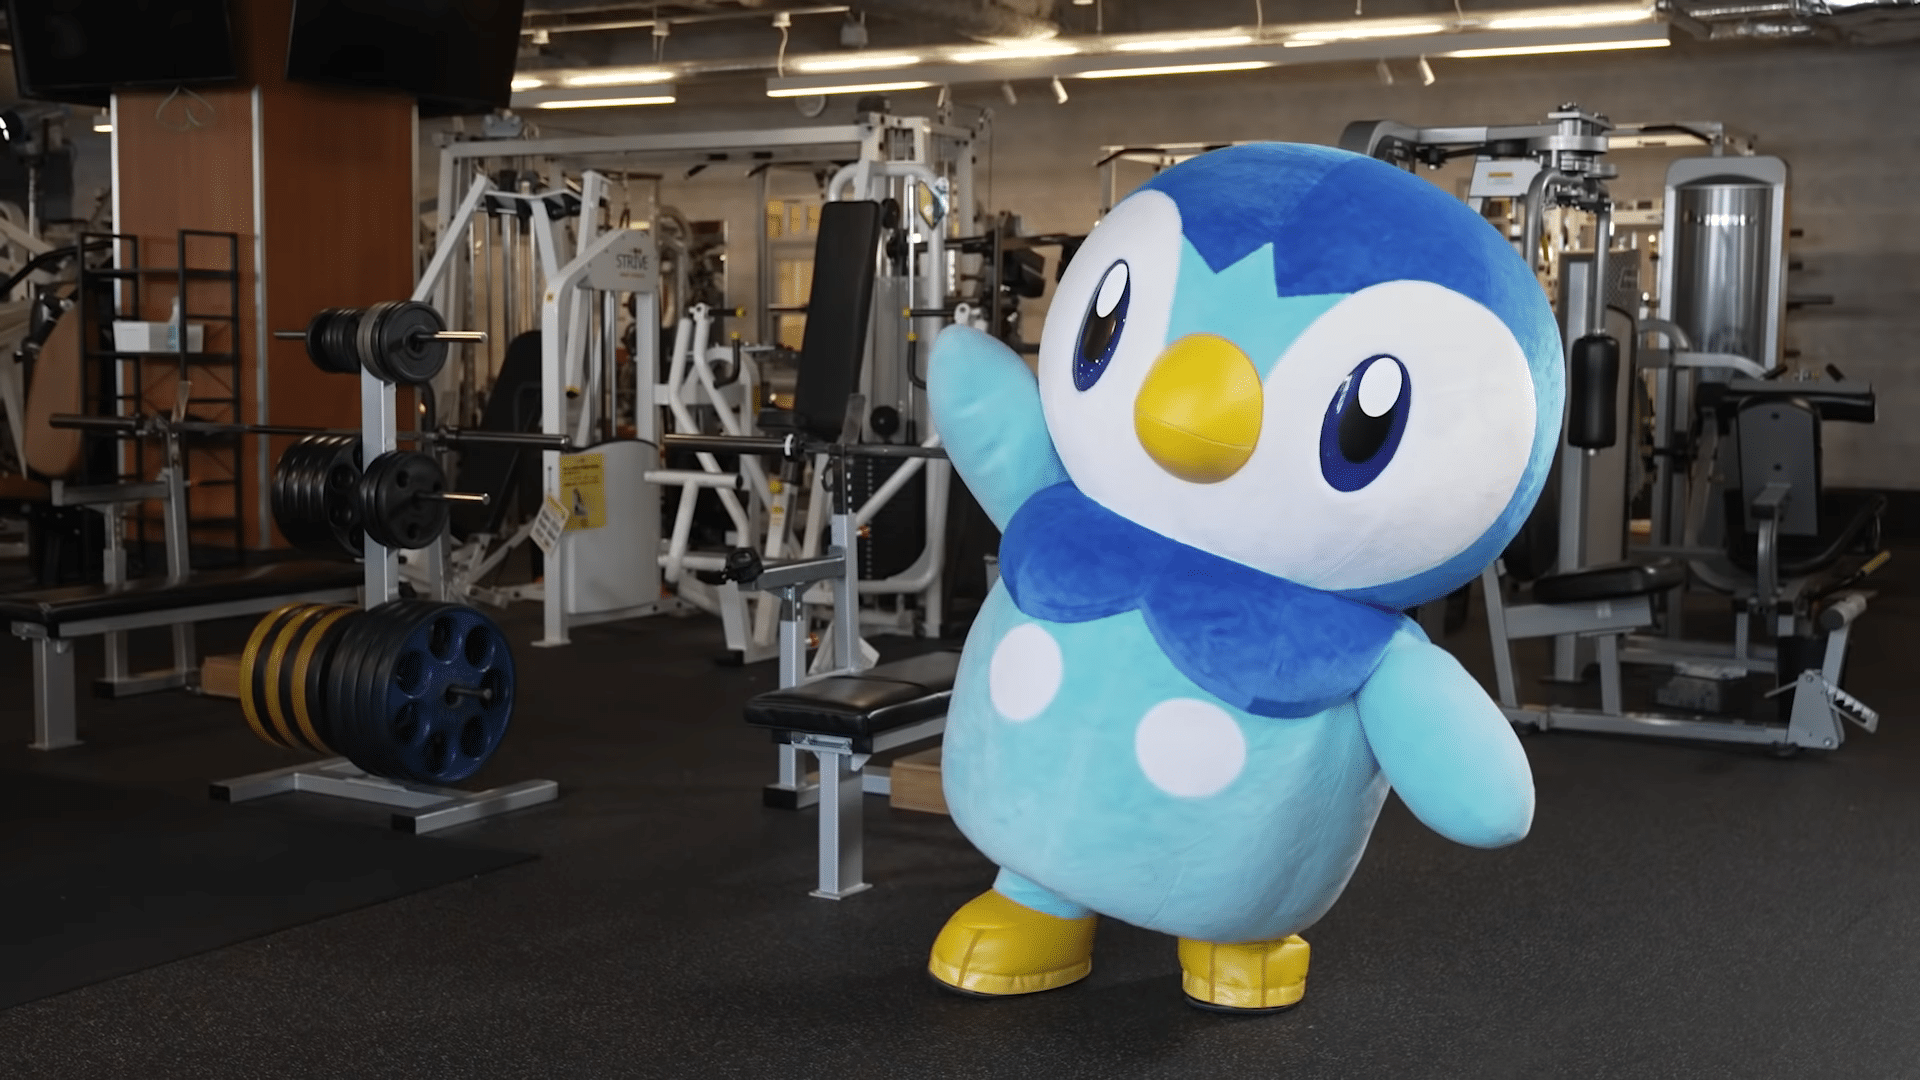 Piplup is featured in a new exercise video